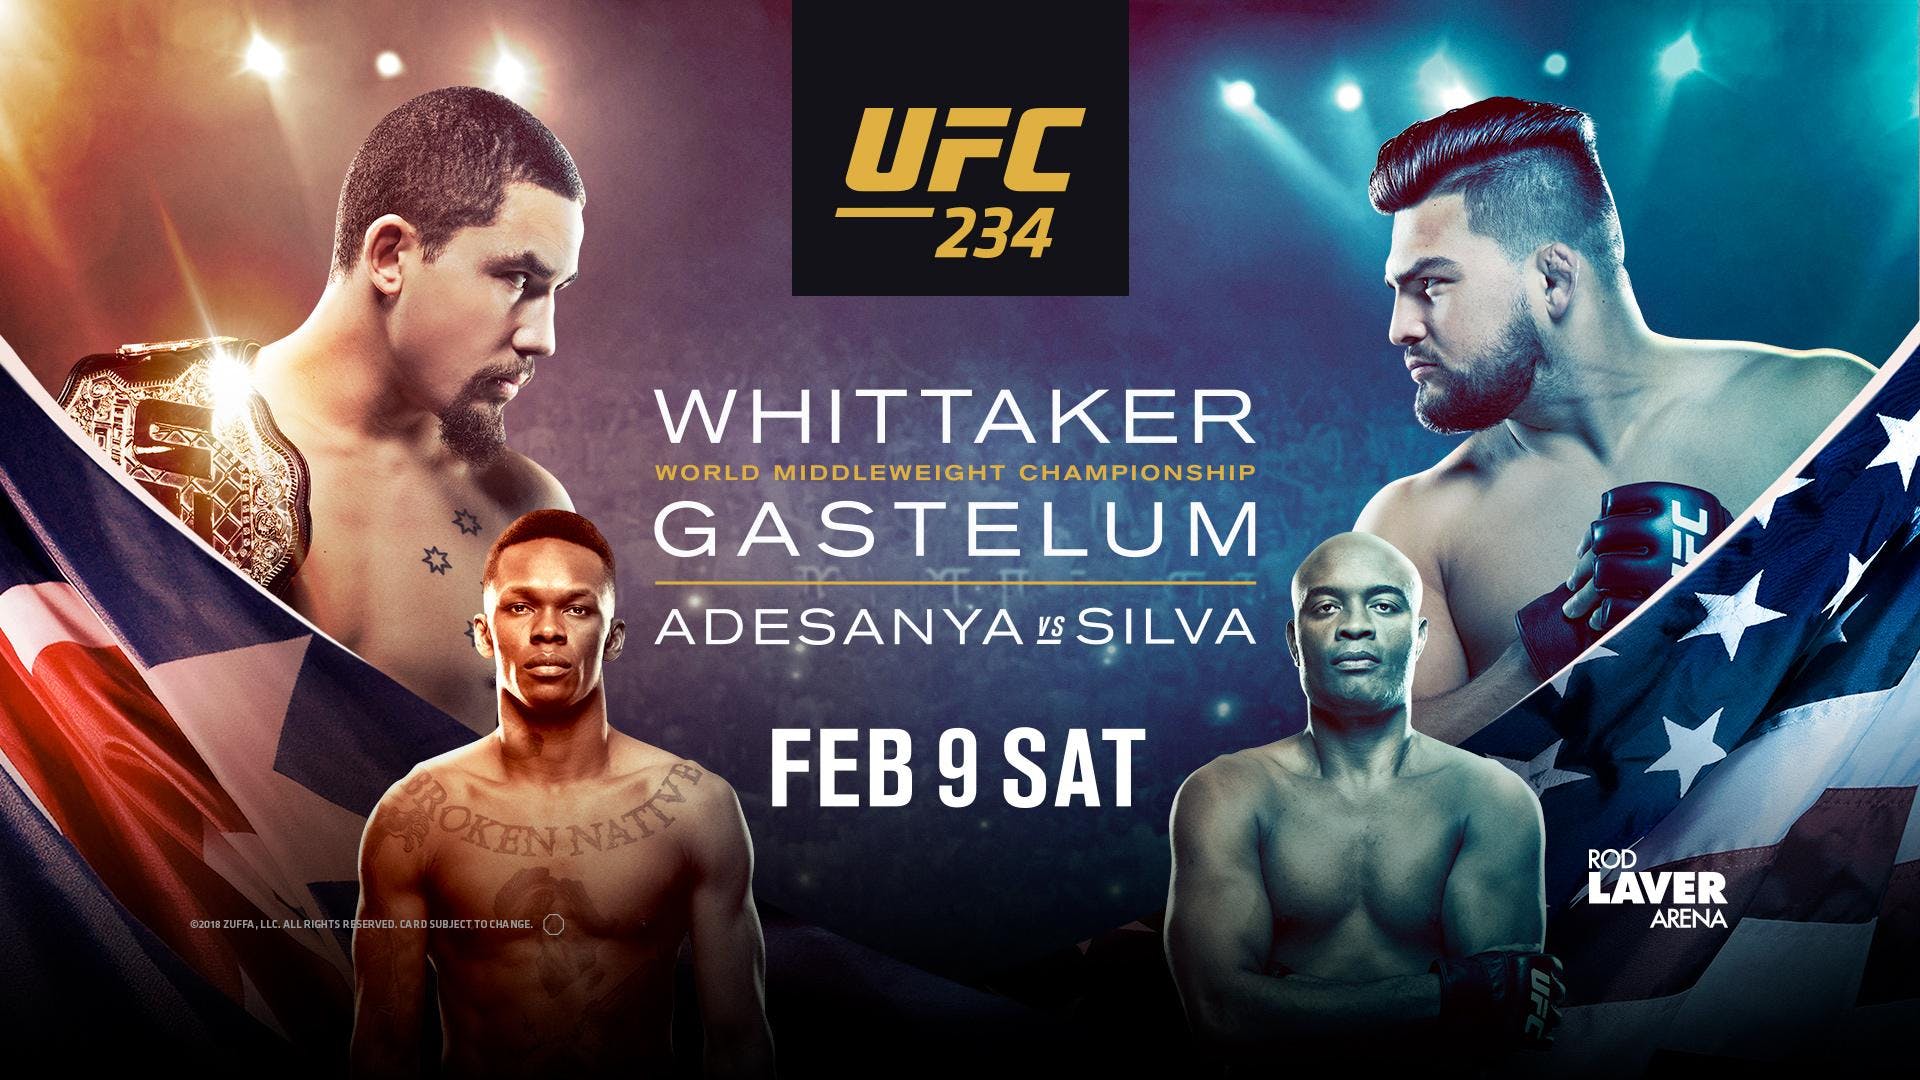 Ufc Whittaker Vs Gastelum At Red Bar And Lounge Feb